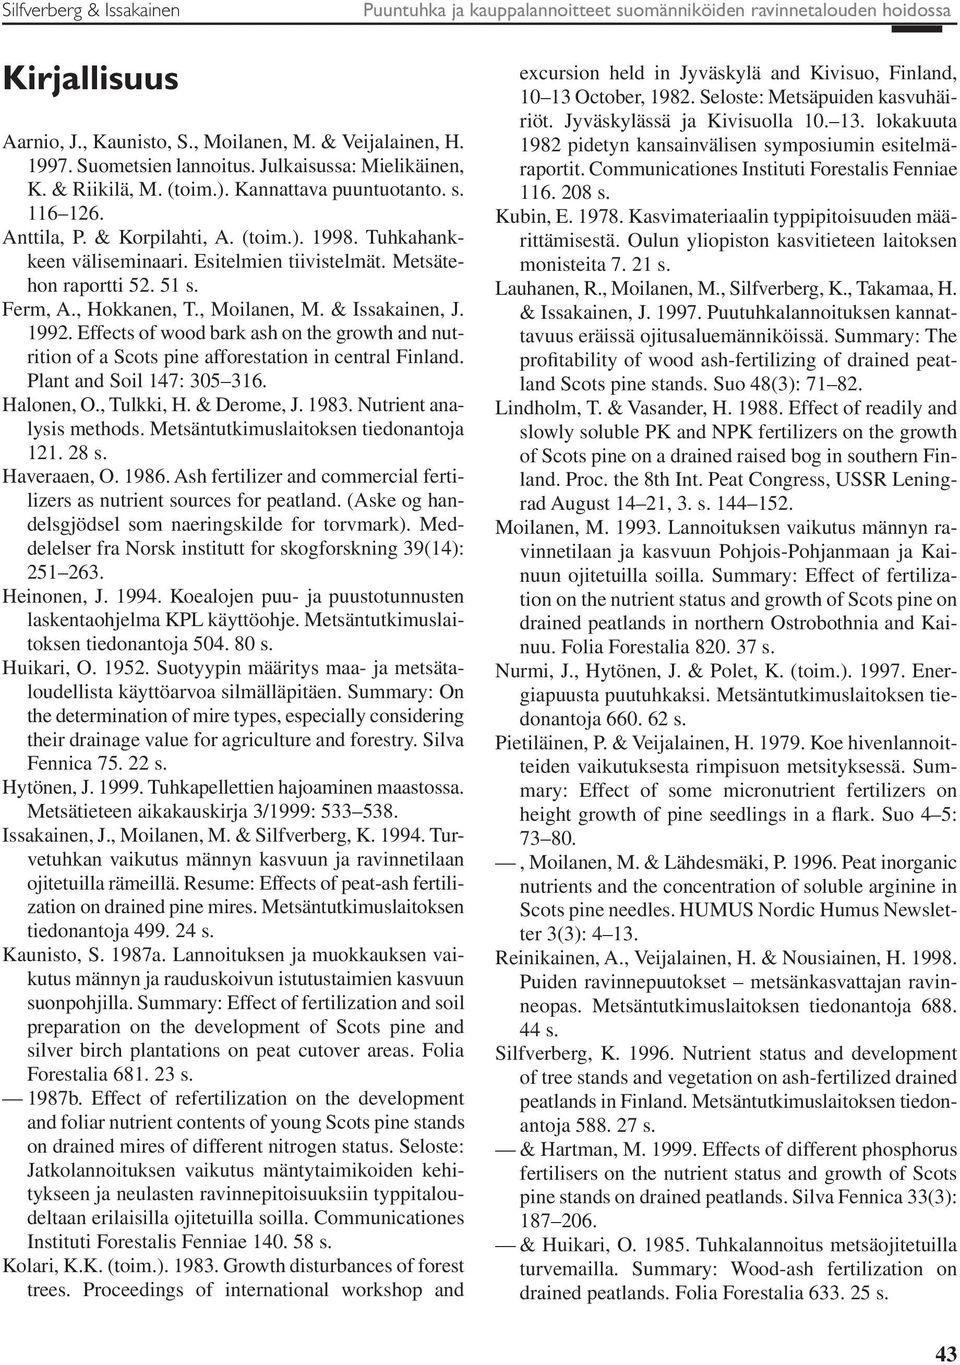 Metsätehon raportti 52. 51 s. Ferm, A., Hokkanen, T., Moilanen, M. & Issakainen, J. 1992. Effects of wood bark ash on the growth and nutrition of a Scots pine afforestation in central Finland.